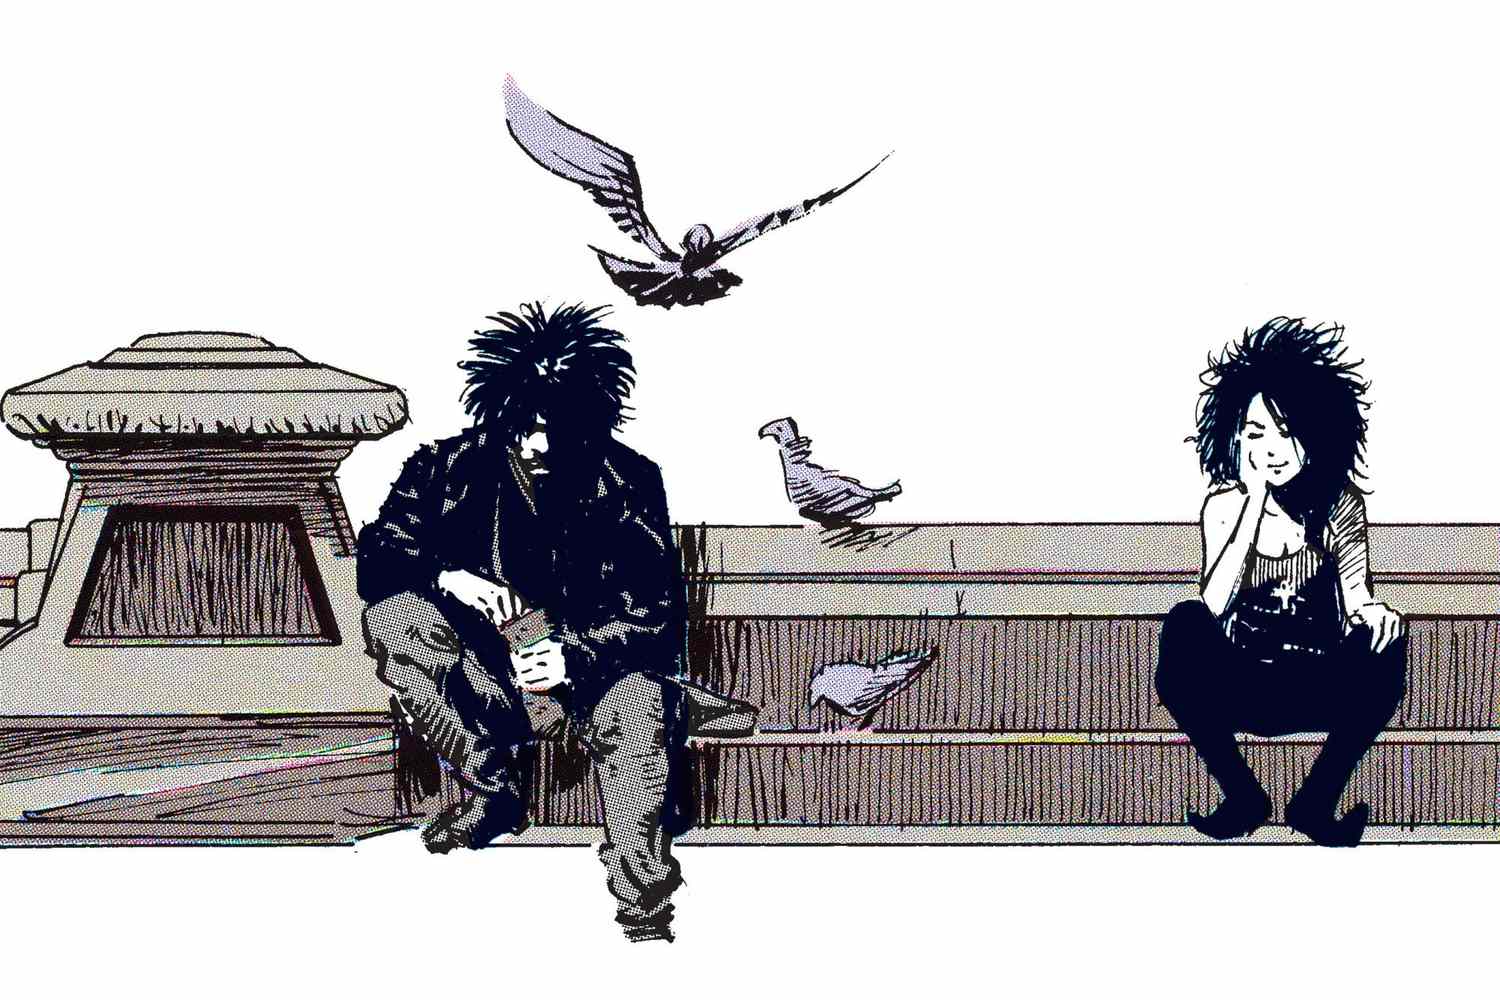 Morpheus a.k.a. Dream is a fictional character who first appeared in the first issue of The Sandman